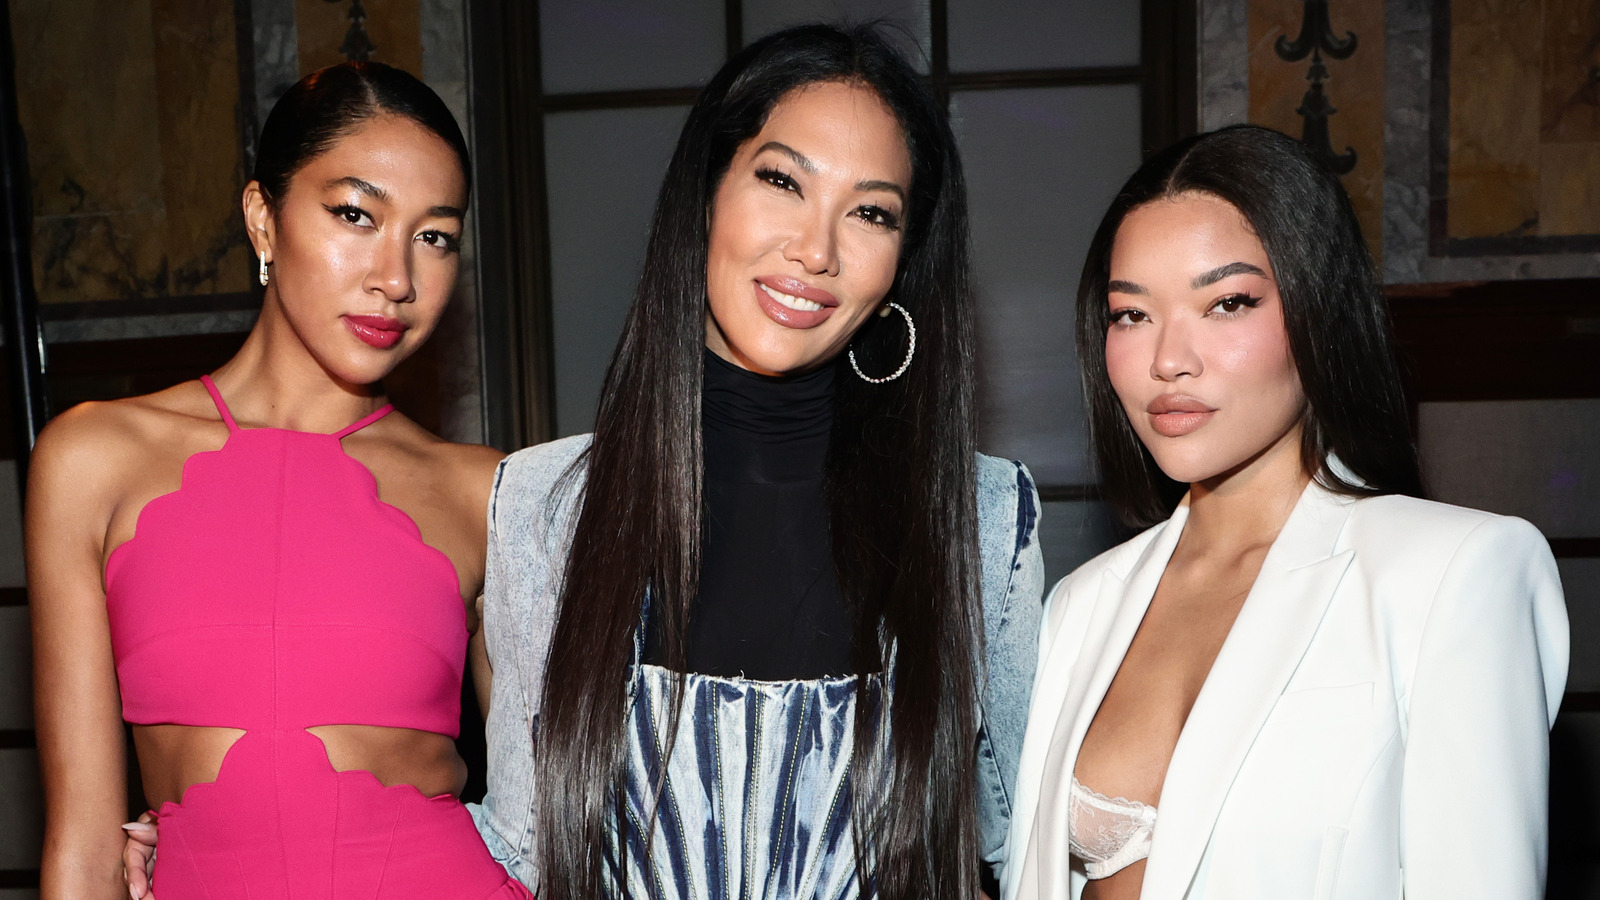 Kimora Lee Simmons' Daughters With Russell Simmons Aren't Her Only Kids